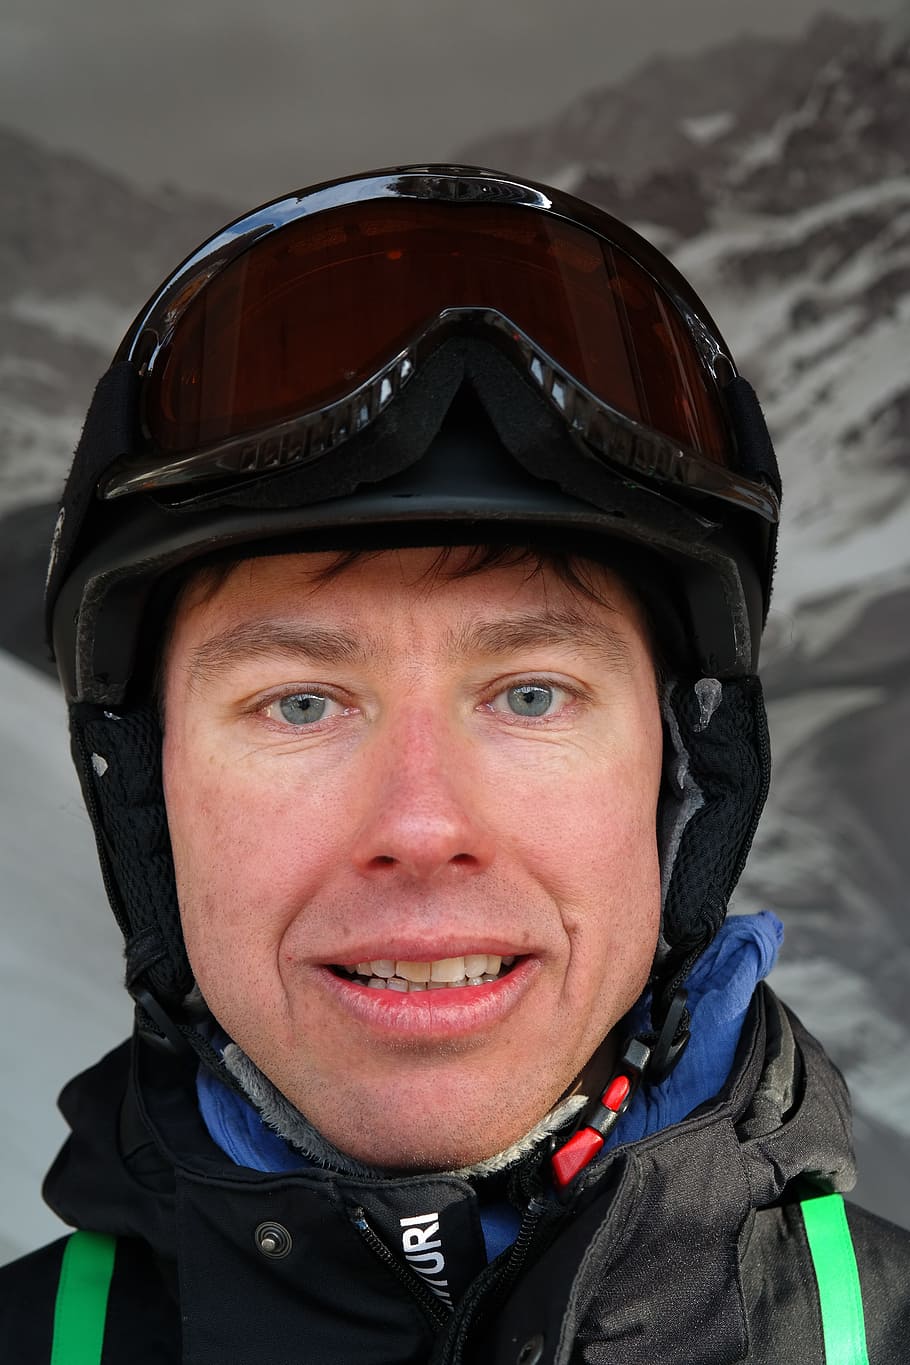 skiers, man, exhausted, tired, winter sports, face, portrait, helm, goggles, fought off